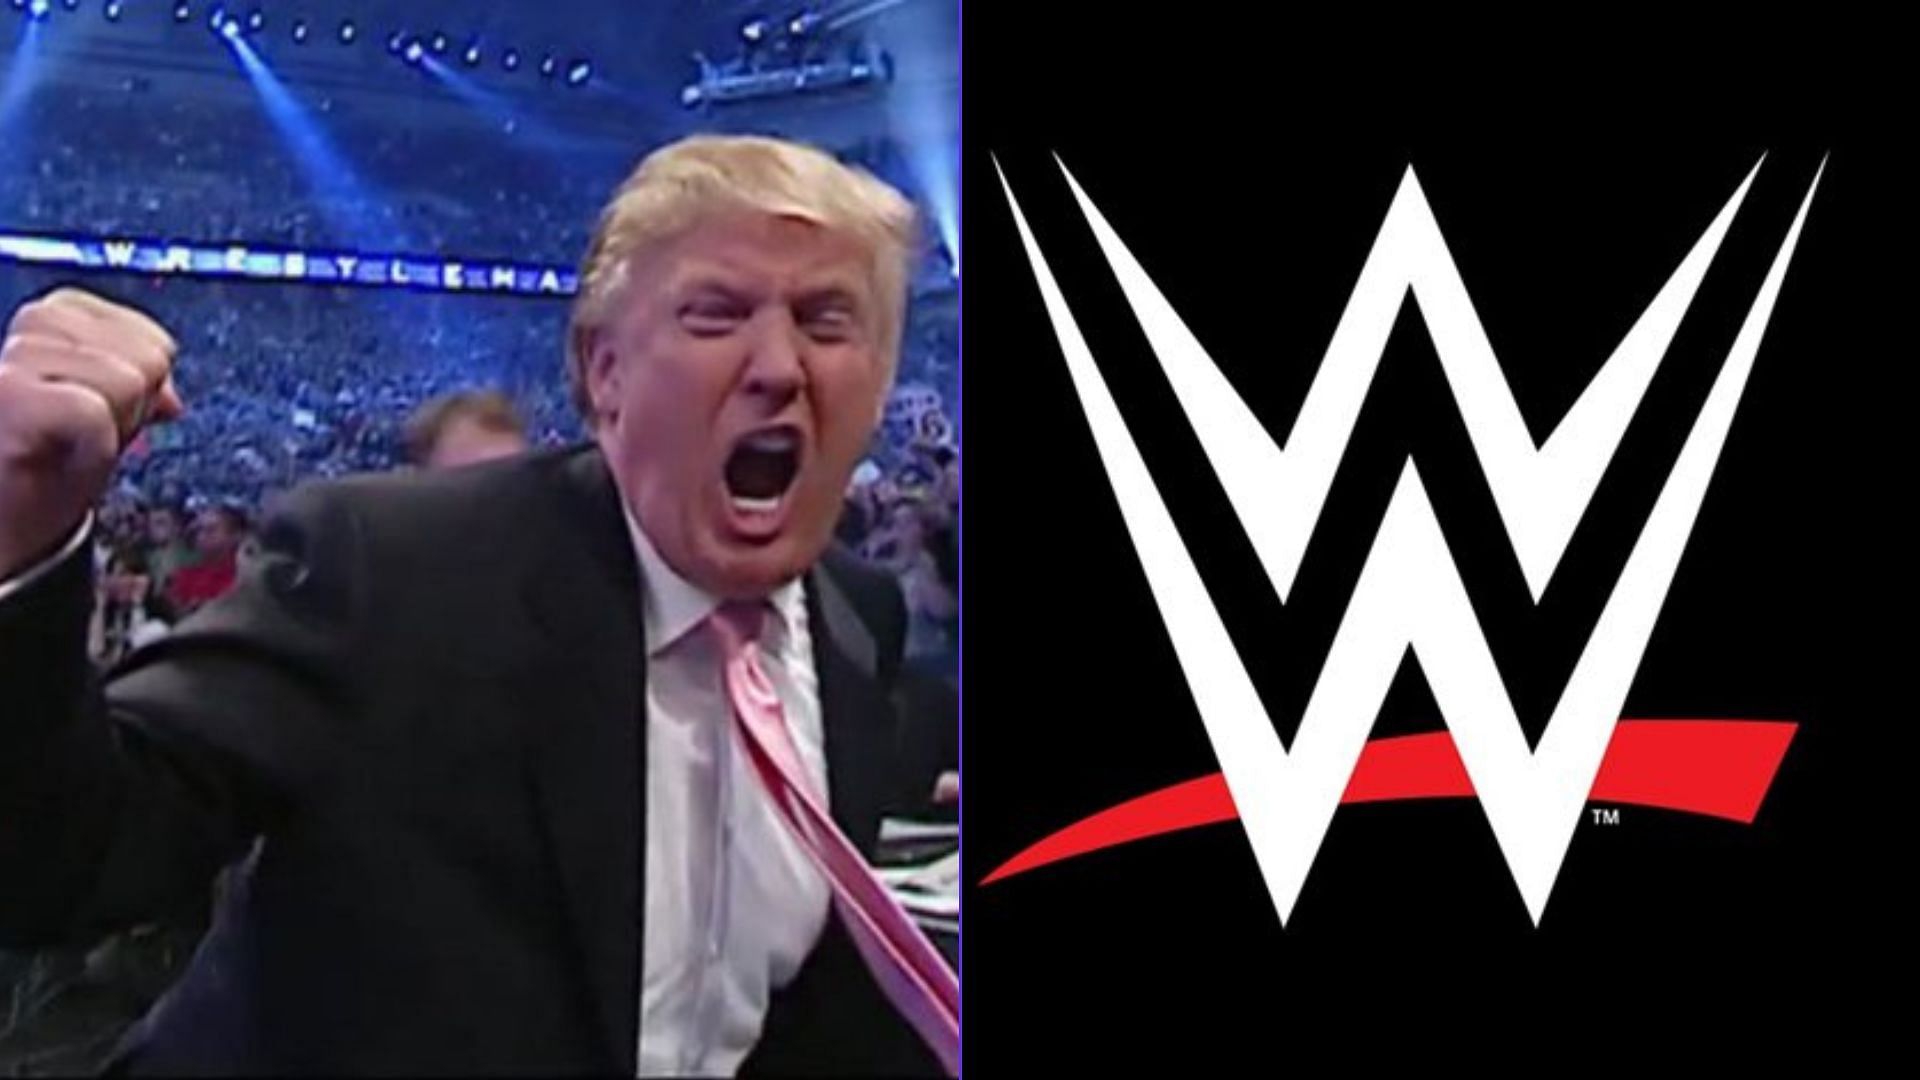 Donald Trump made several appearances on WWE television in the past